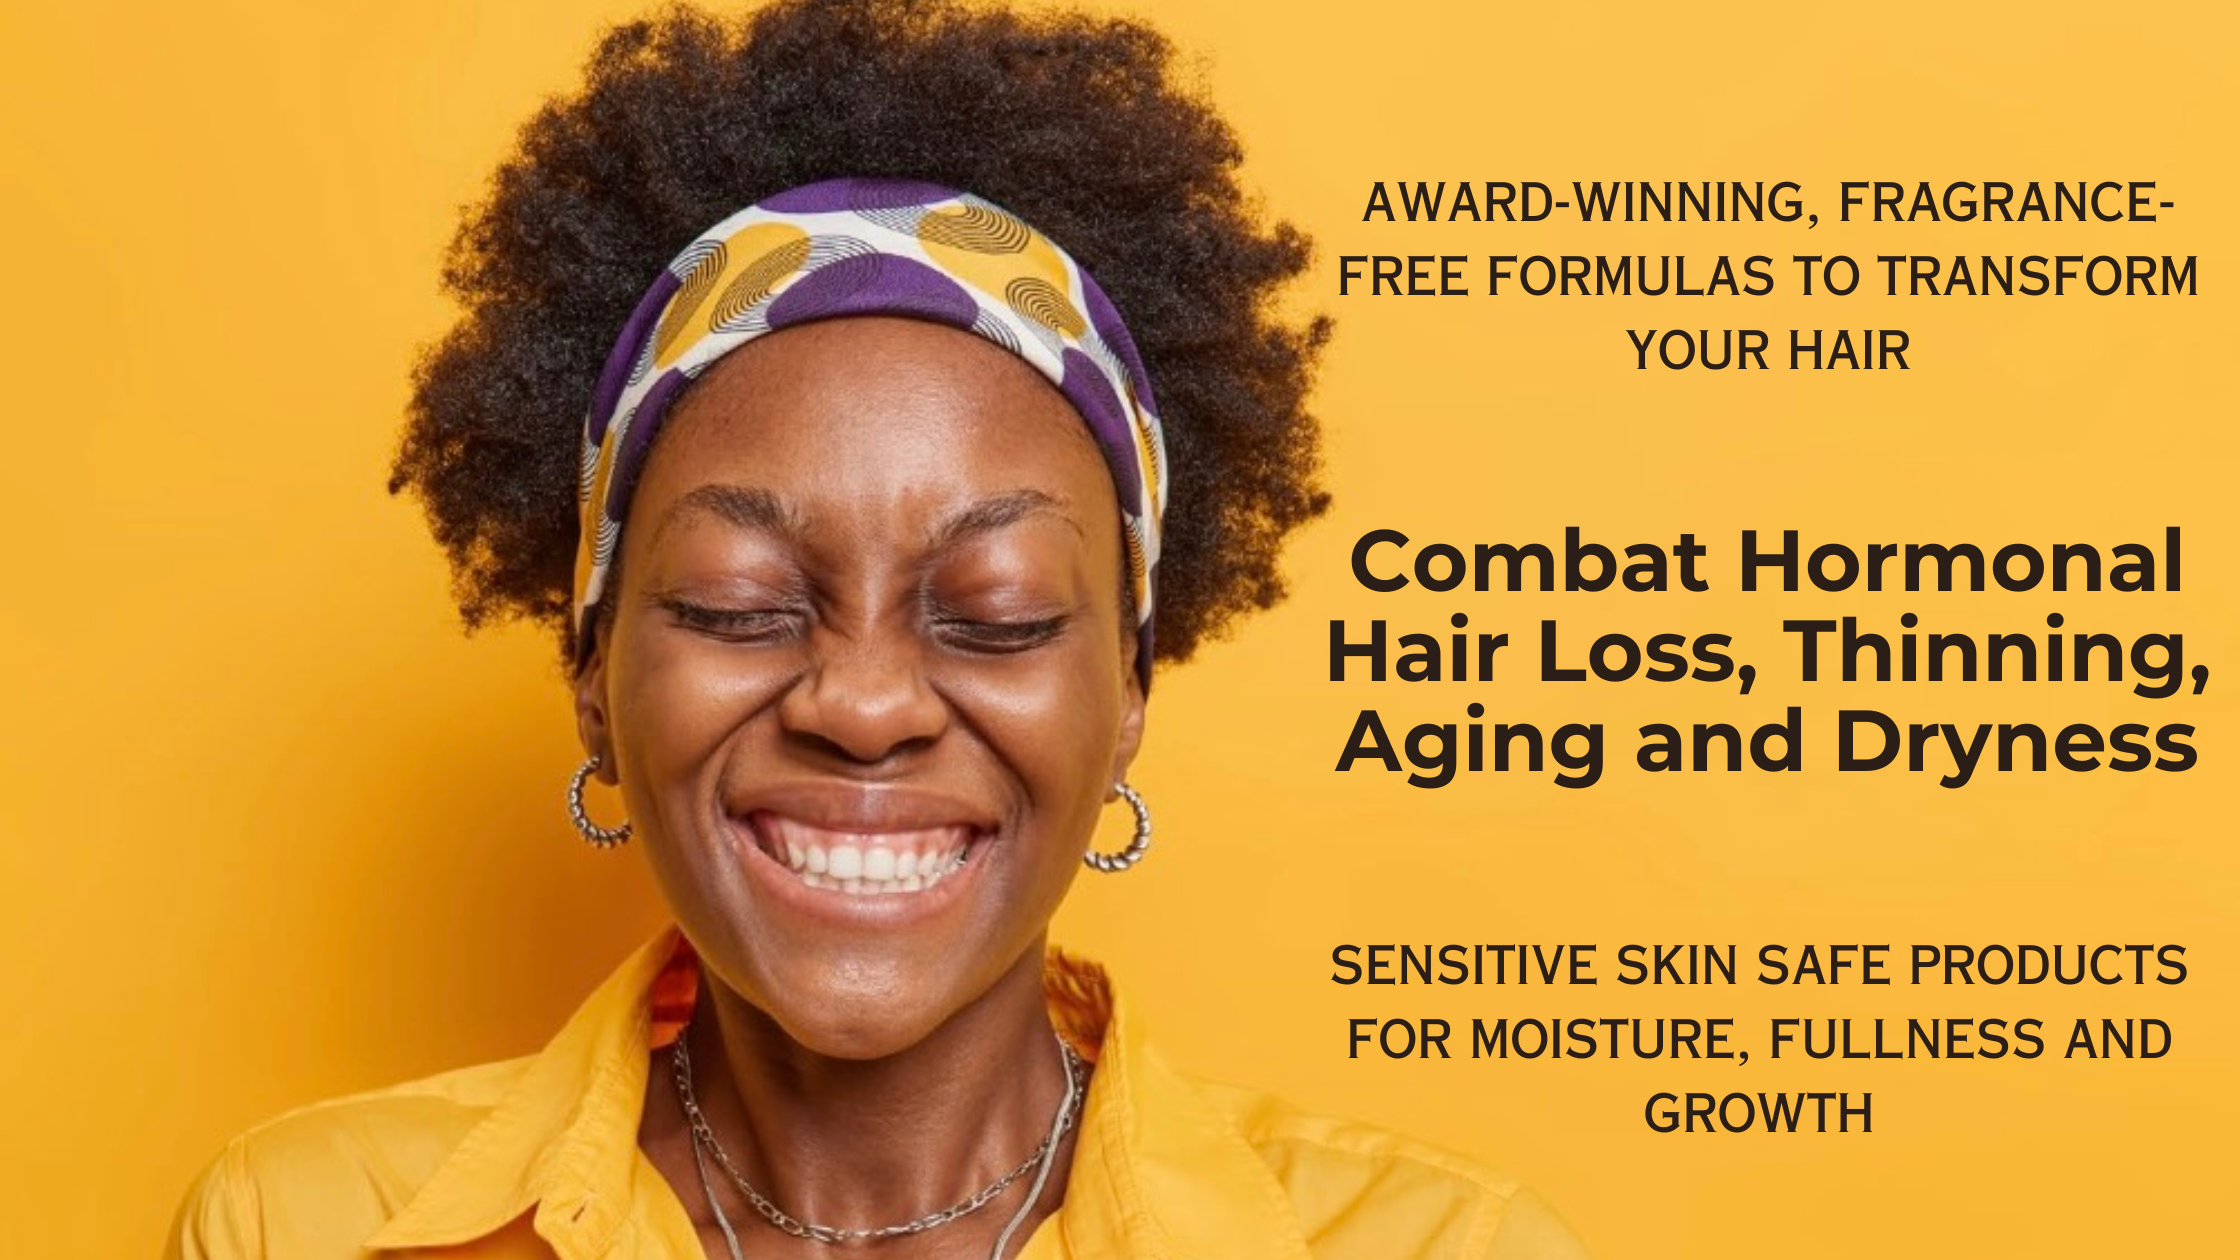 Combat hormonal hair loss, thinning, aging and dryness with award-winning, fragrance-free formulas to transform your hair